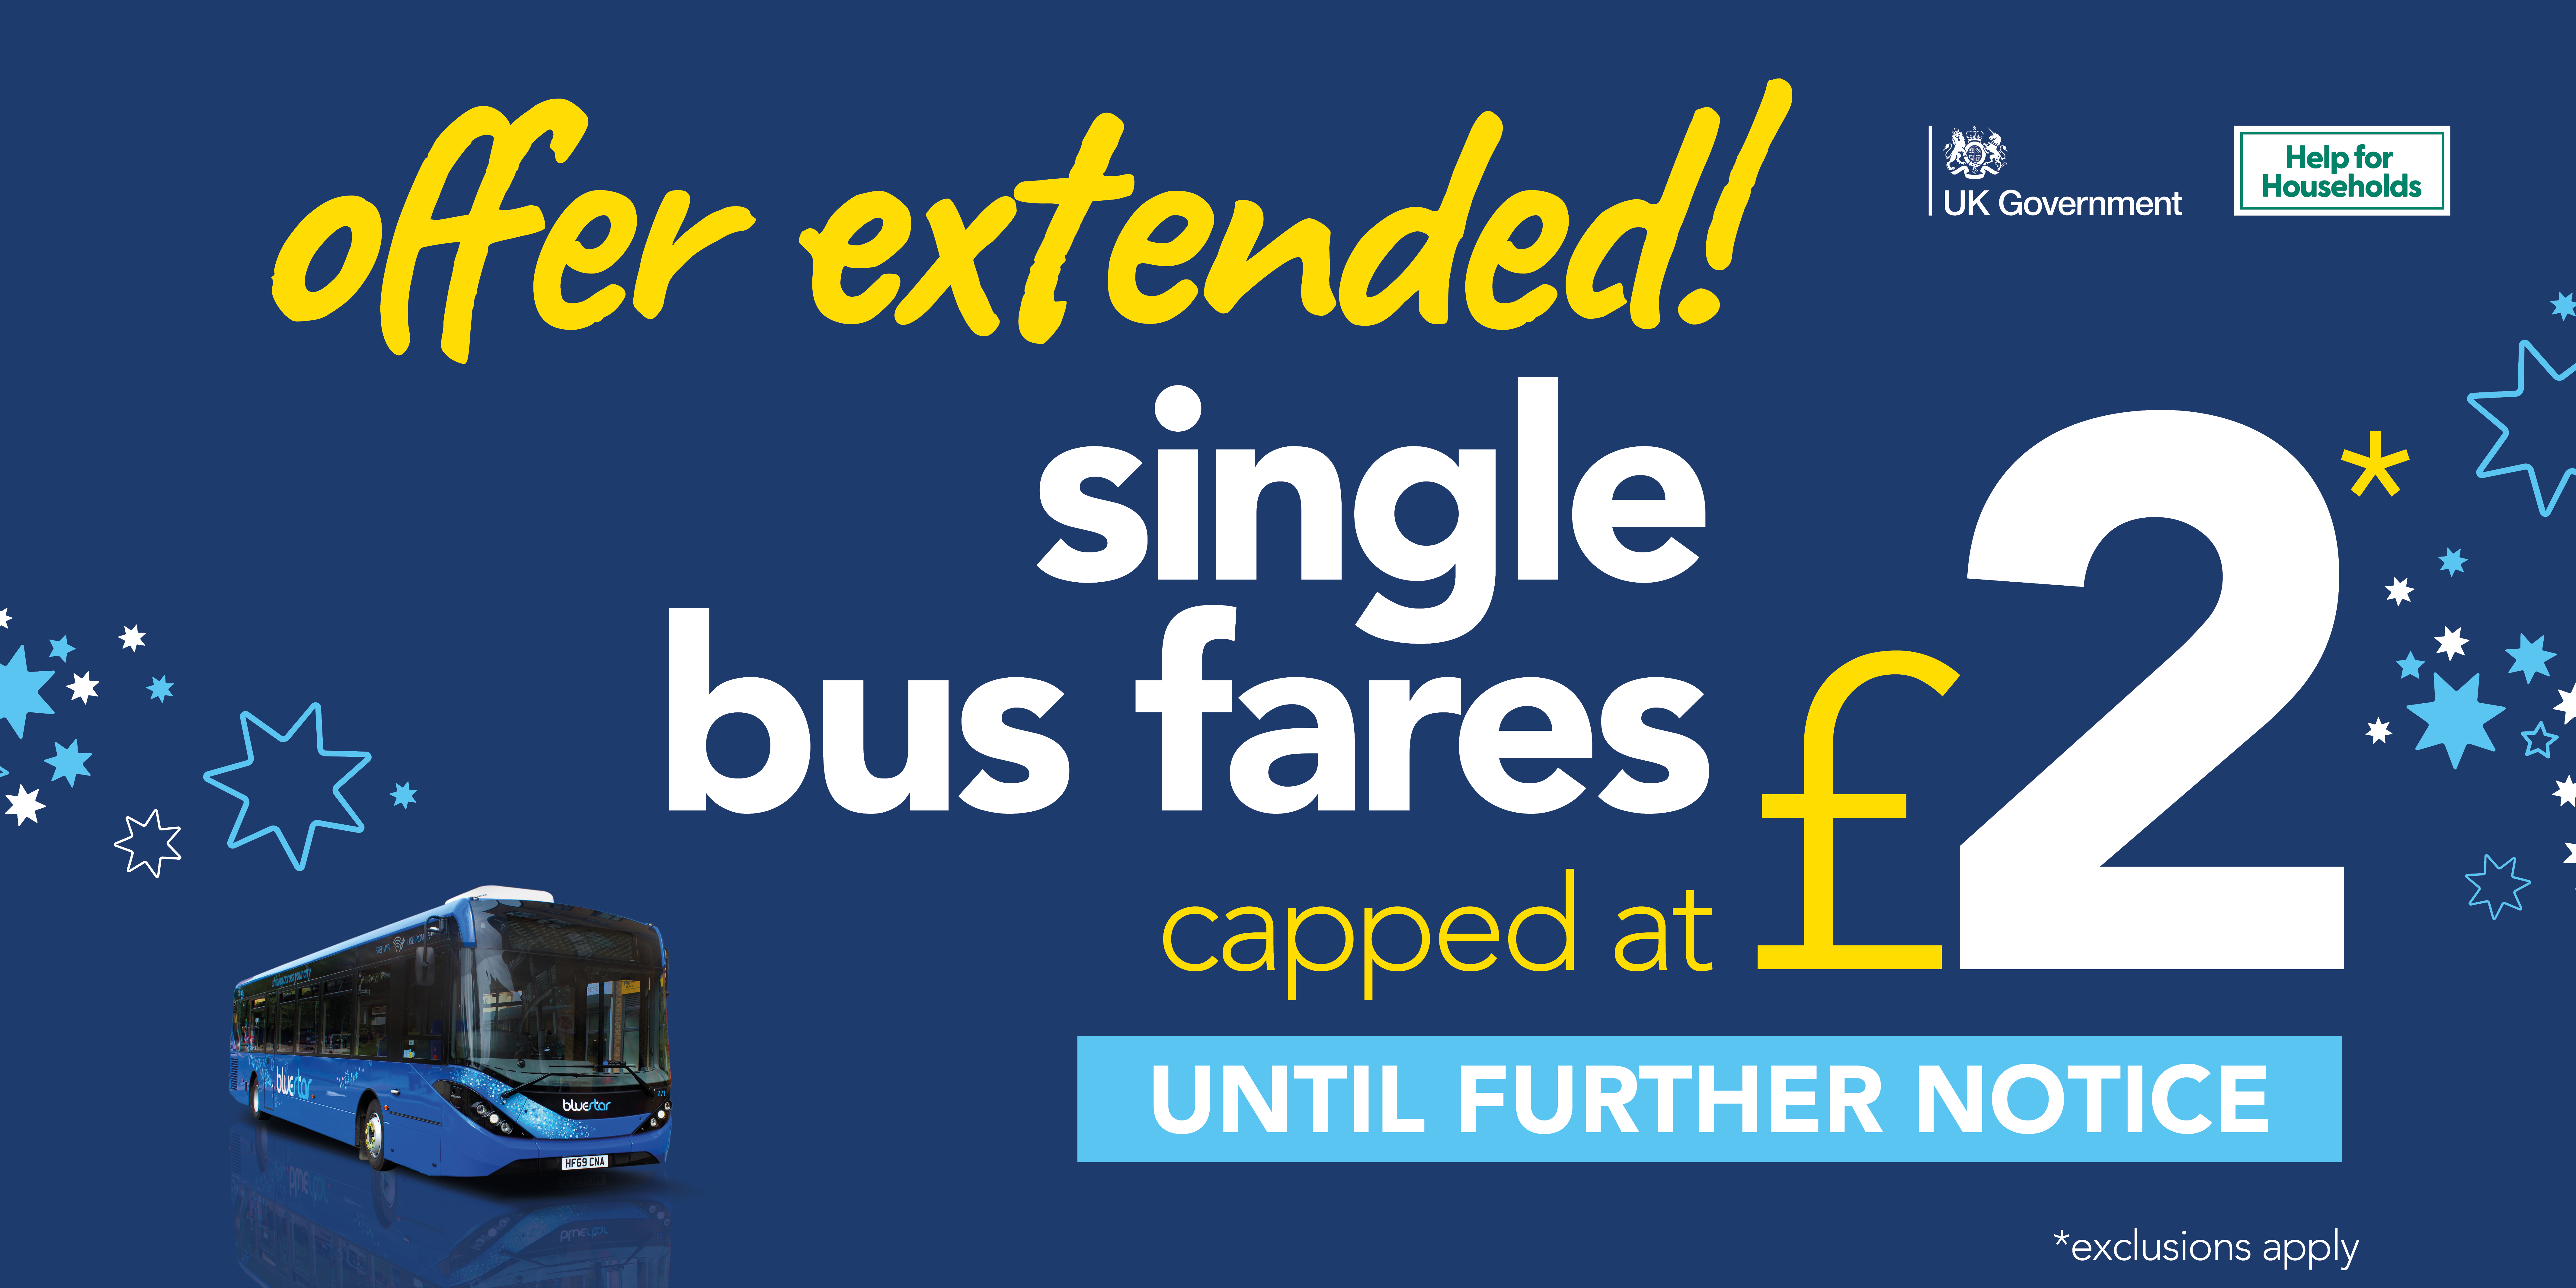 £2 single fare offer extended image